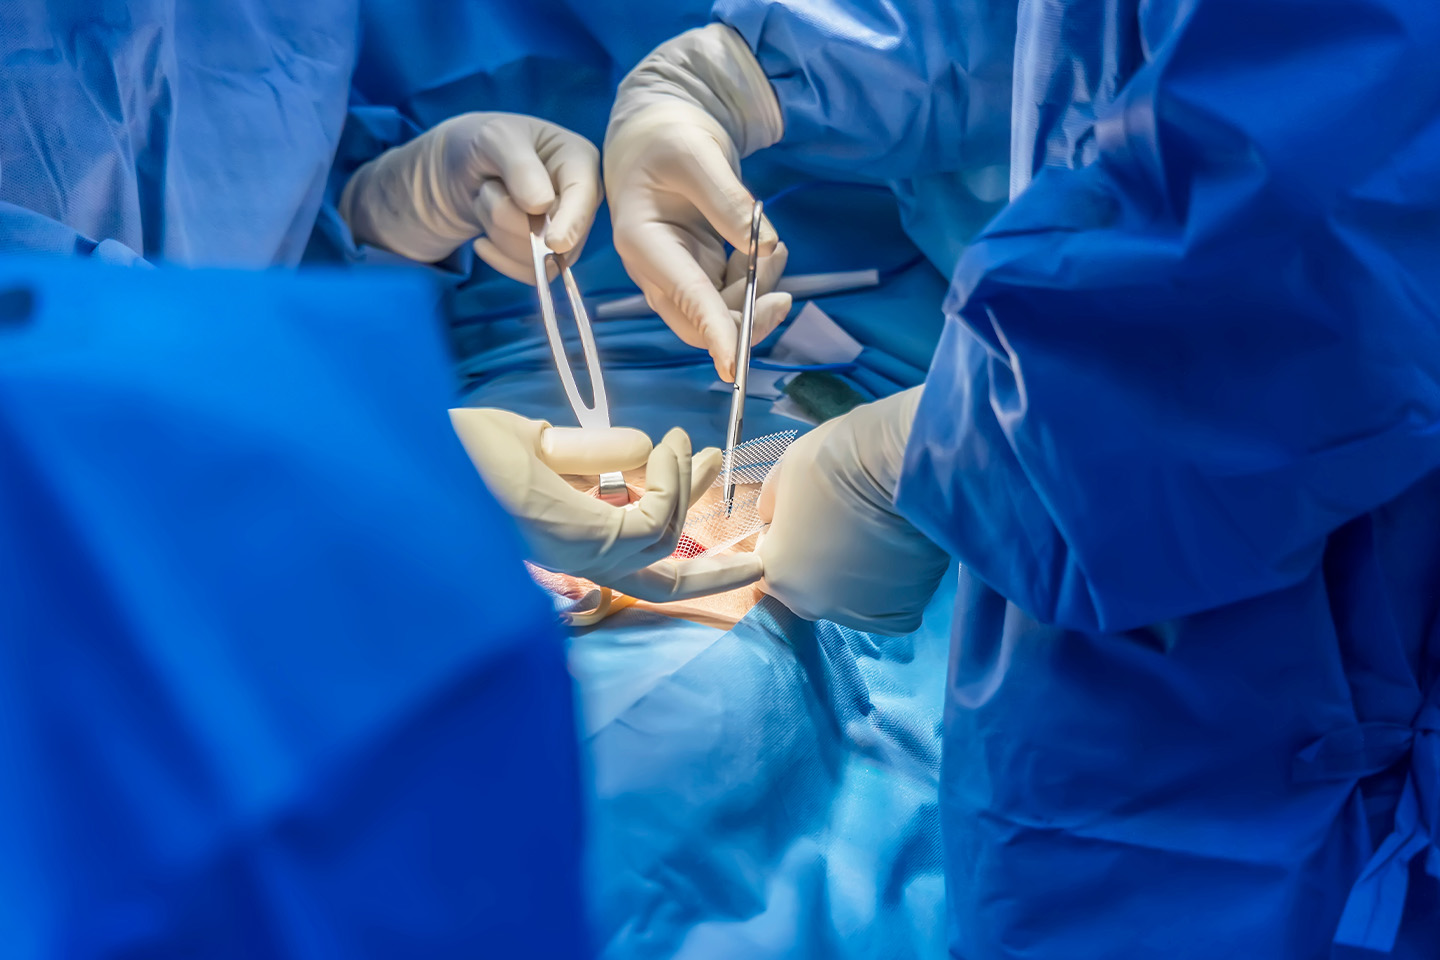 The Crucial Role of Mesh Selection in Hernia Surgery - Understanding the Impact